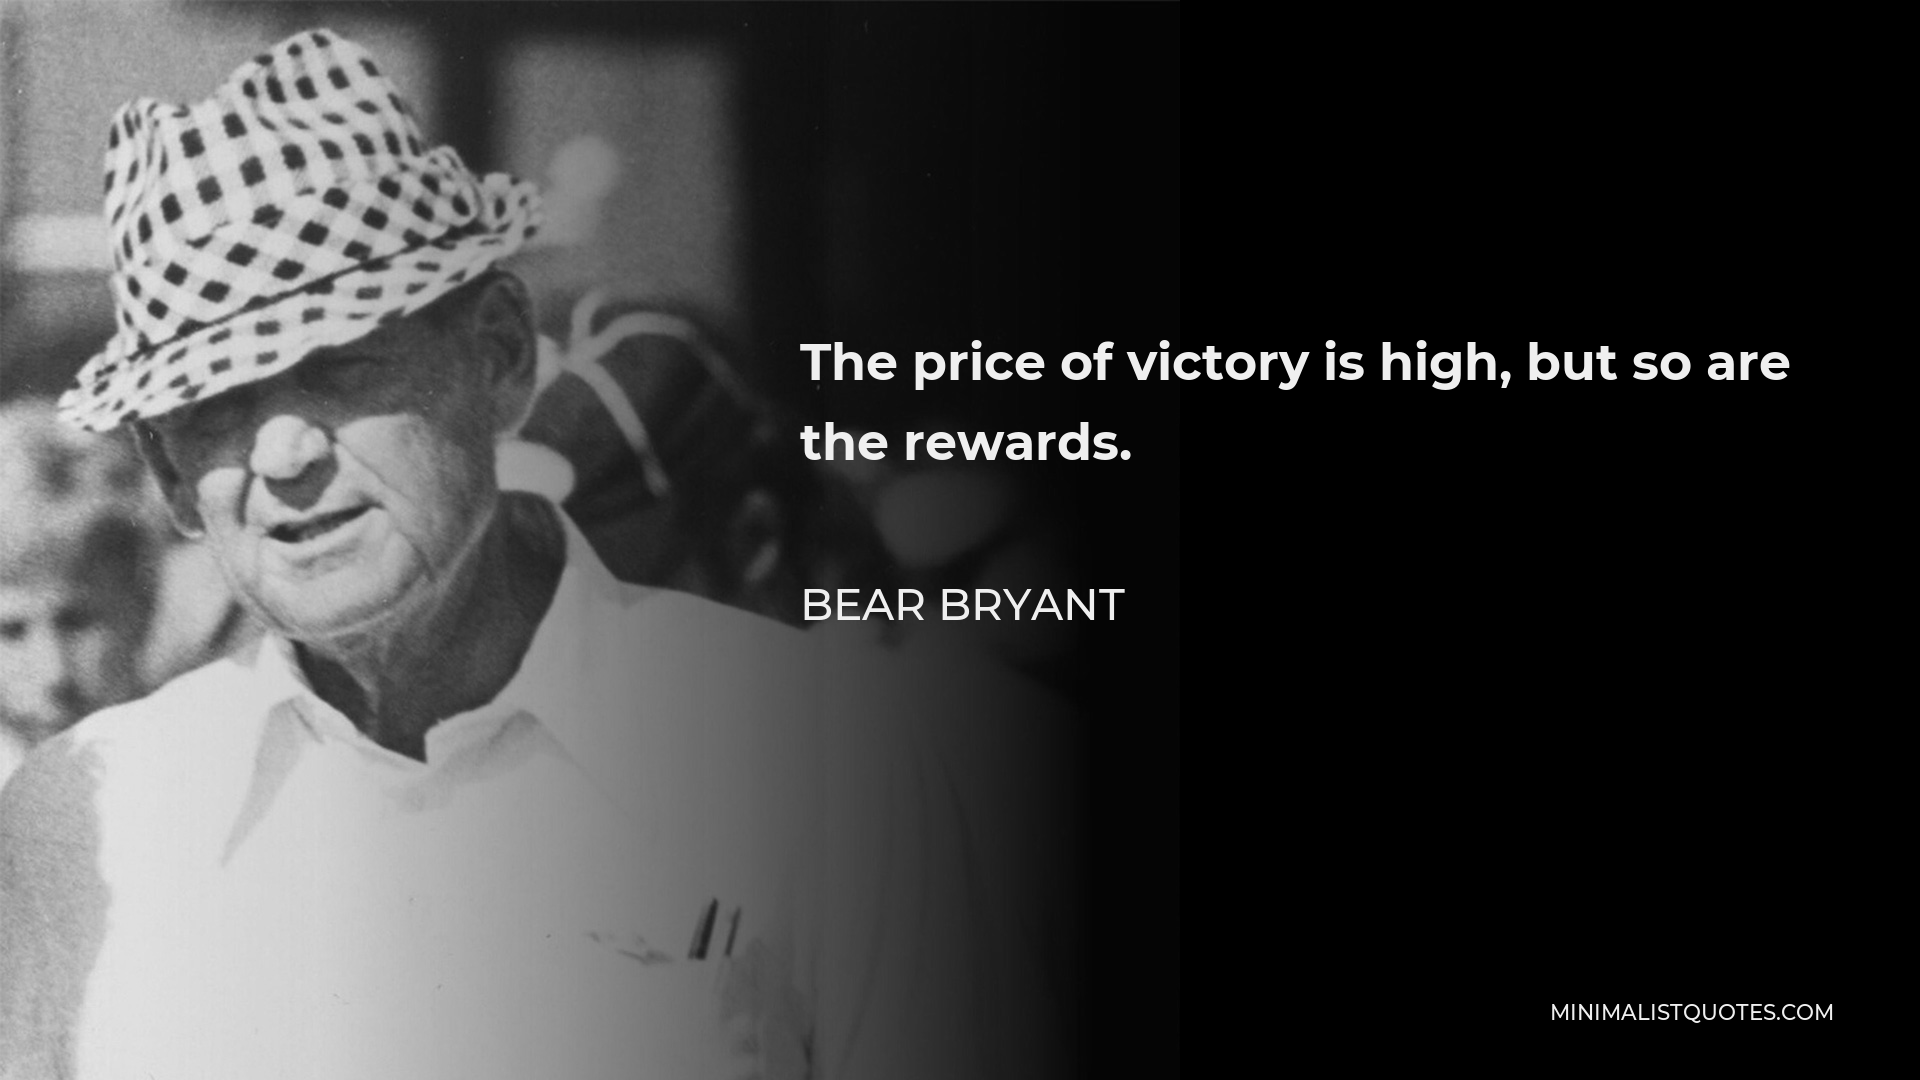 Bear Bryant Quote - The price of victory is high, but so are the rewards.